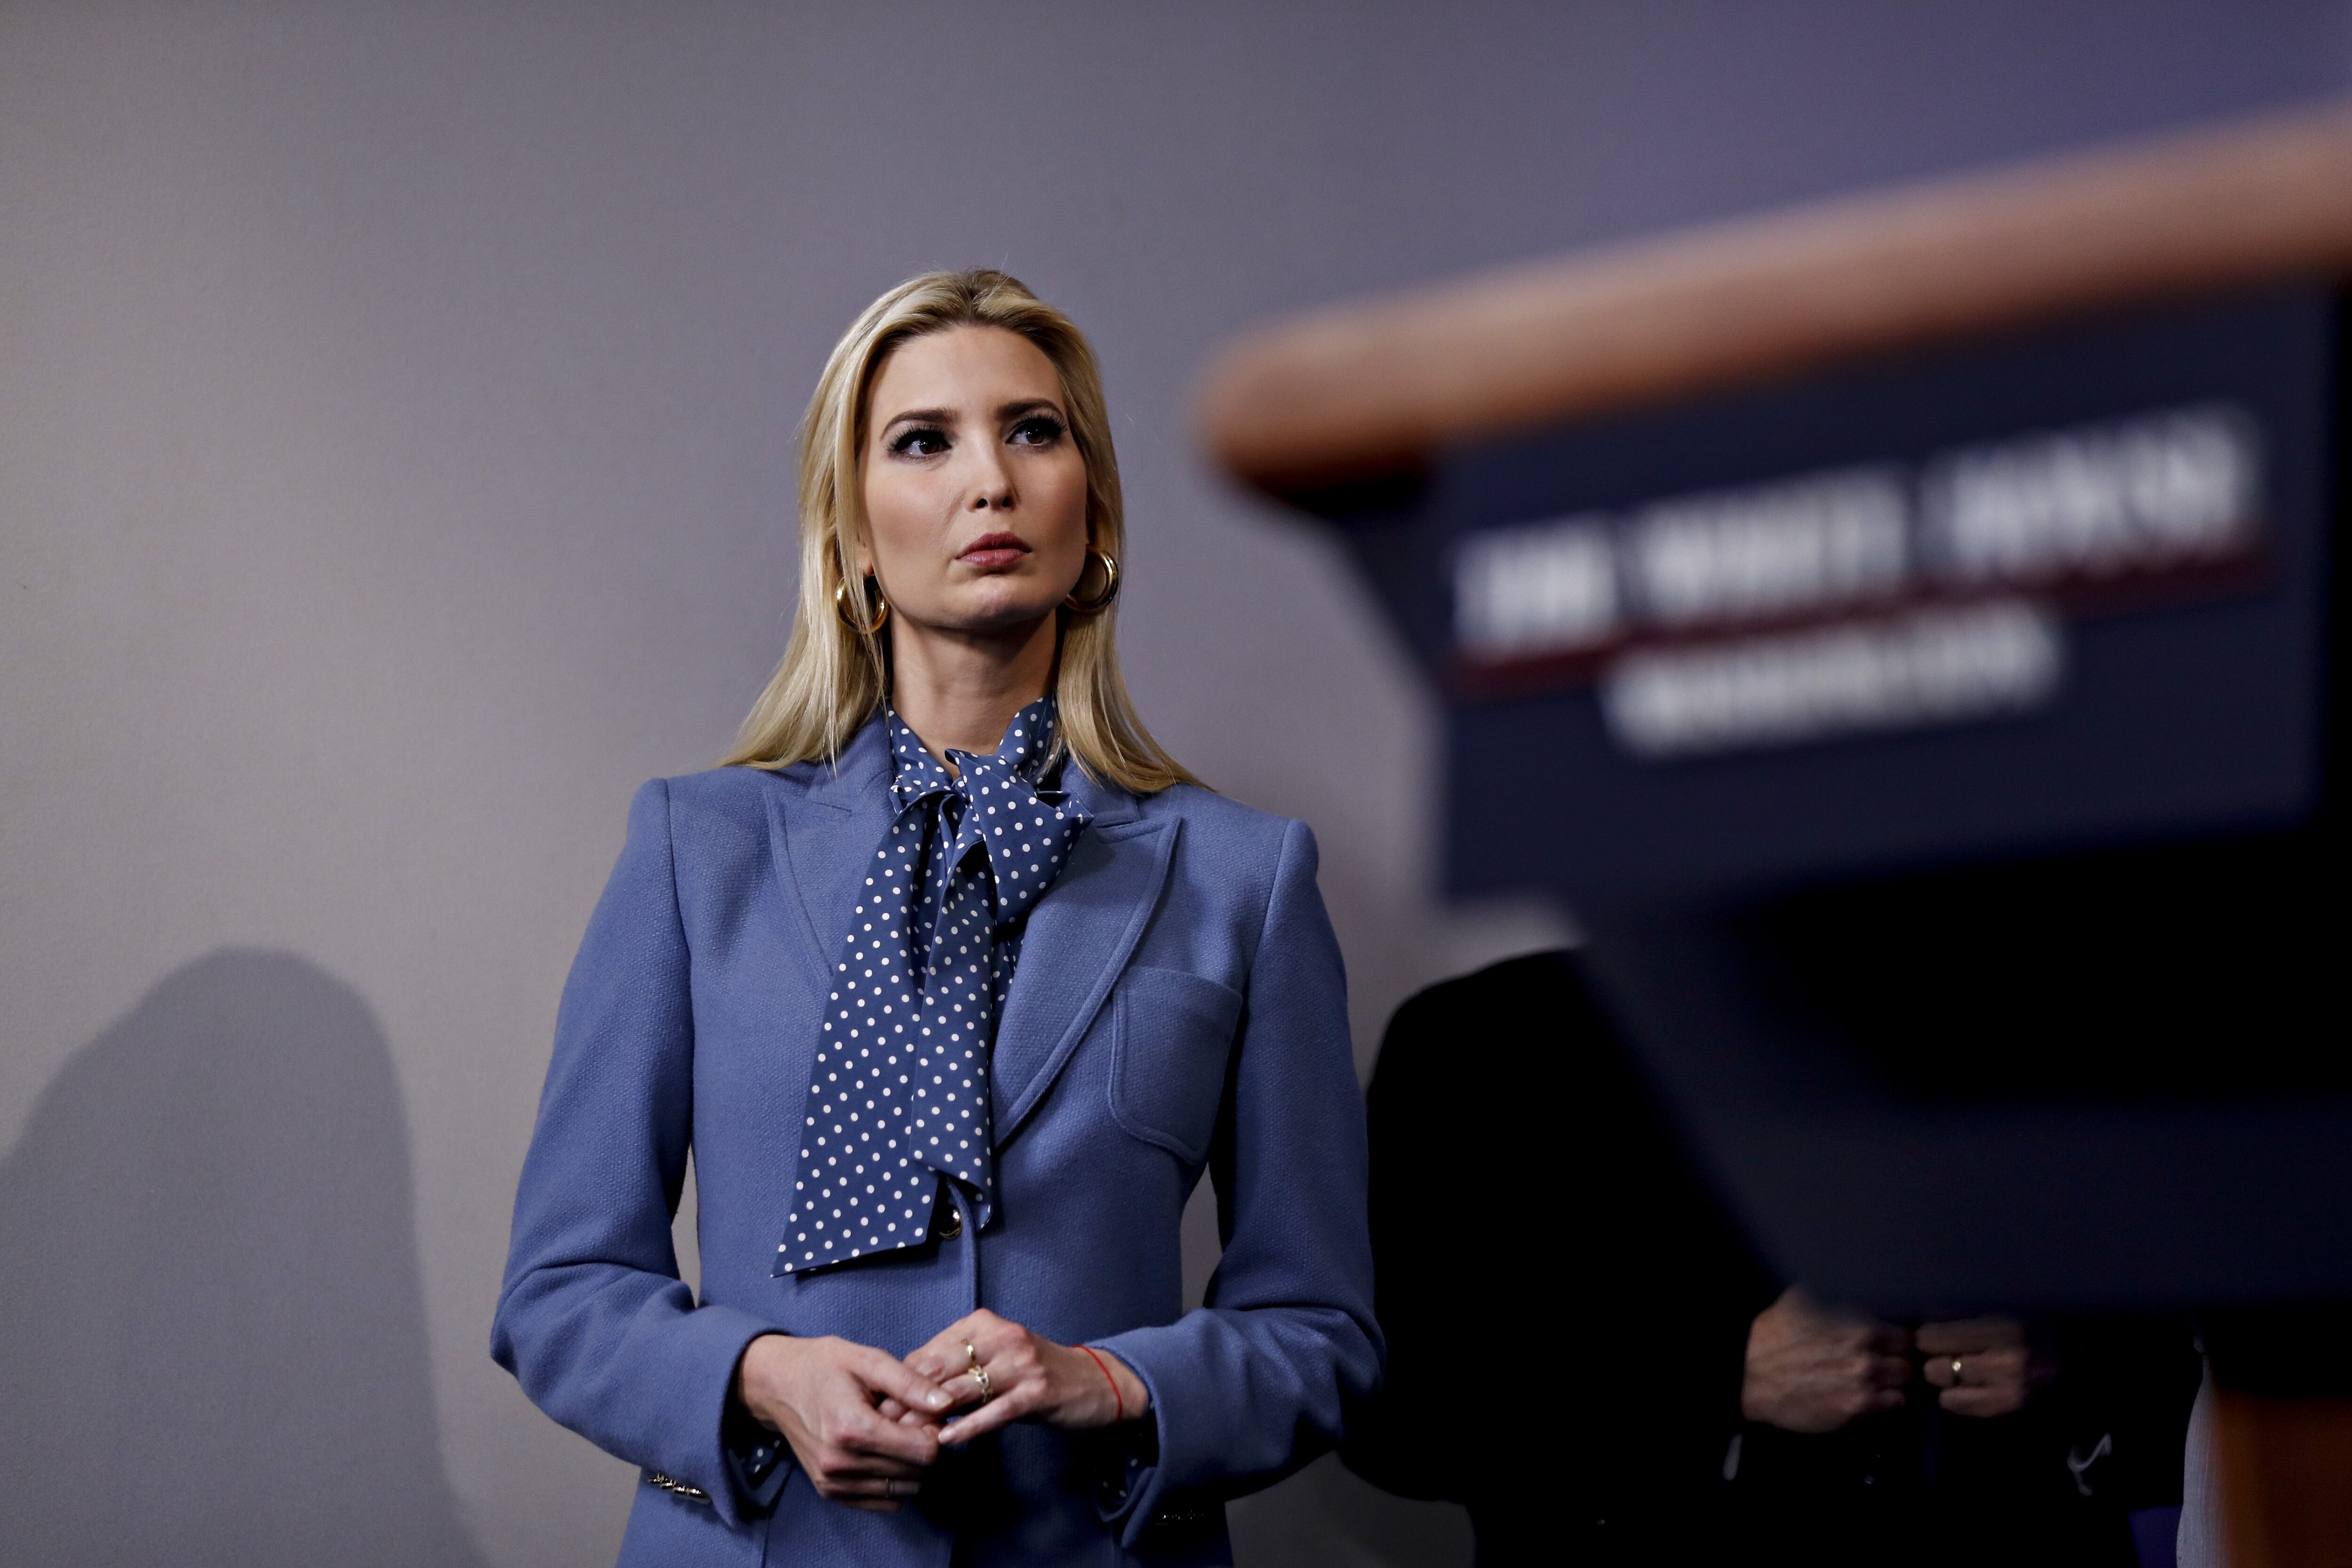 Ivanka Trump, Ivanka Trump, senior adviser to U.S. President Donald Trump, listens during a Coronavirus Task Force news conference in the briefing room of the White House in Washington, D.C., U.S., on Friday, March 20, 2020. Americans will have to practice social distancing for at least several more weeks to mitigate U.S. cases of Covid-19, Anthony S. Fauci of the National Institutes of Health said today.  (CONTACTO)20/03/2020 ONLY FOR USE IN SPAIN